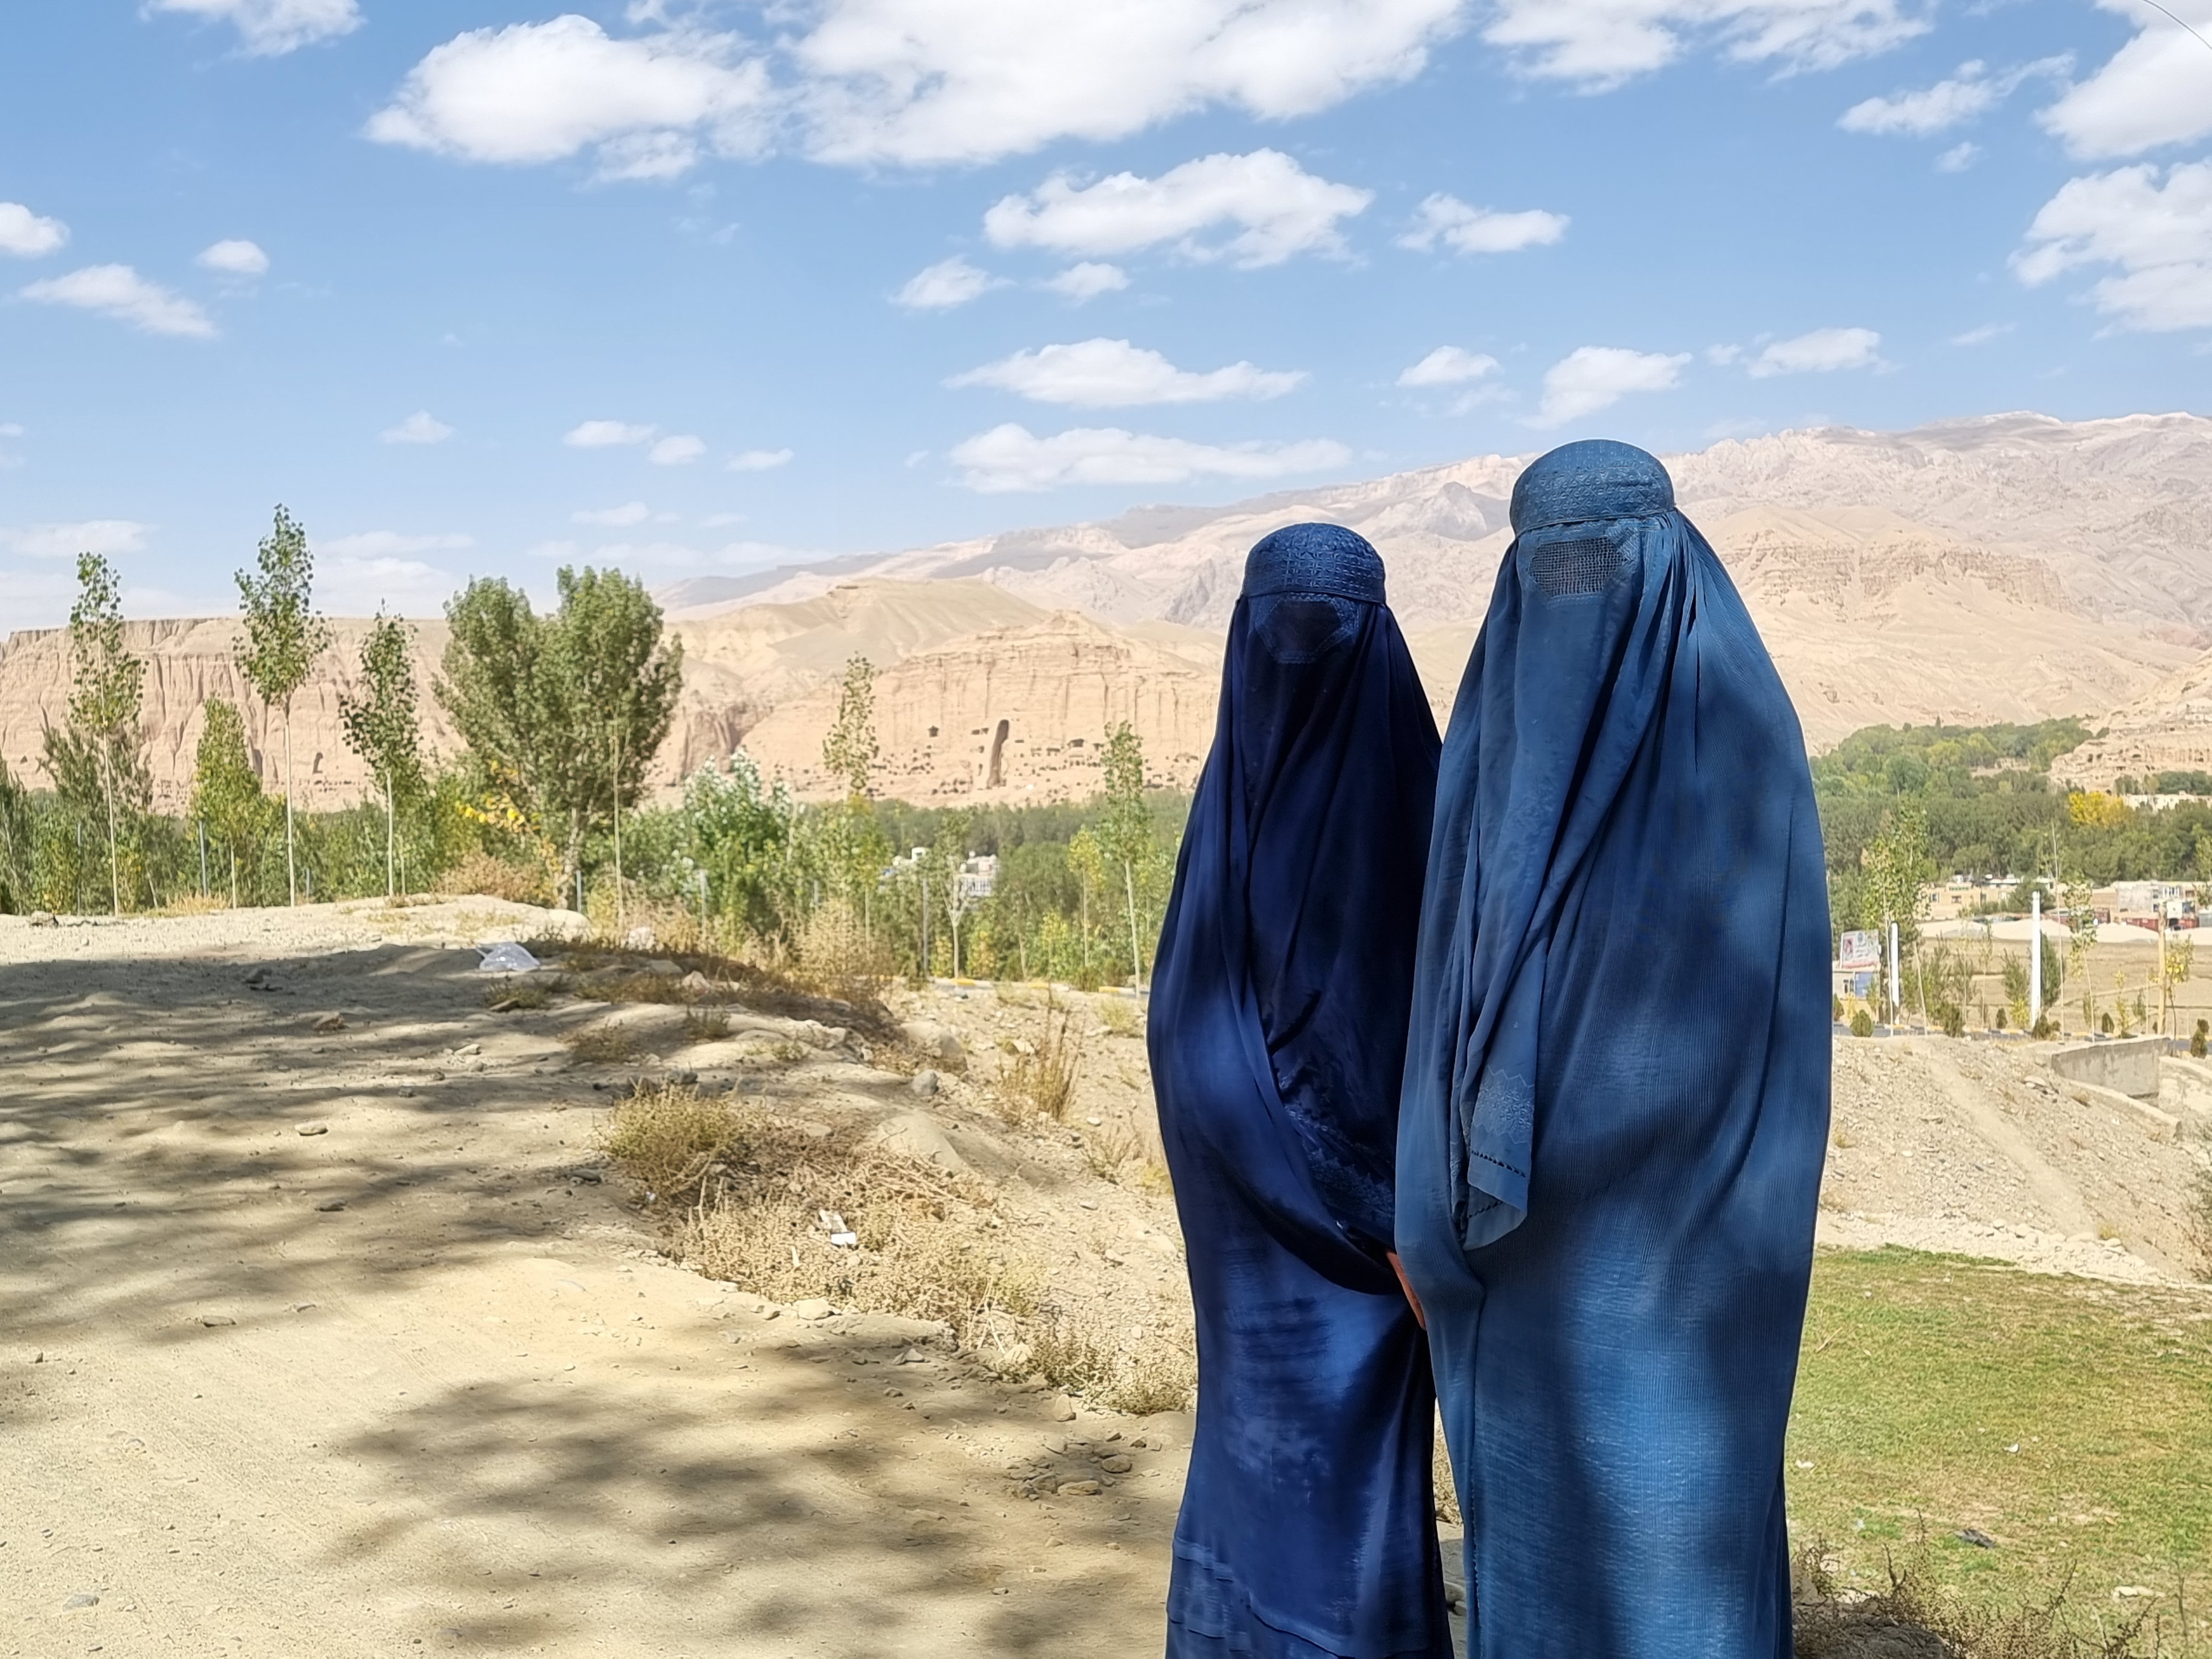 I travelled around Taliban-controlled Afghanistan. This is what I saw